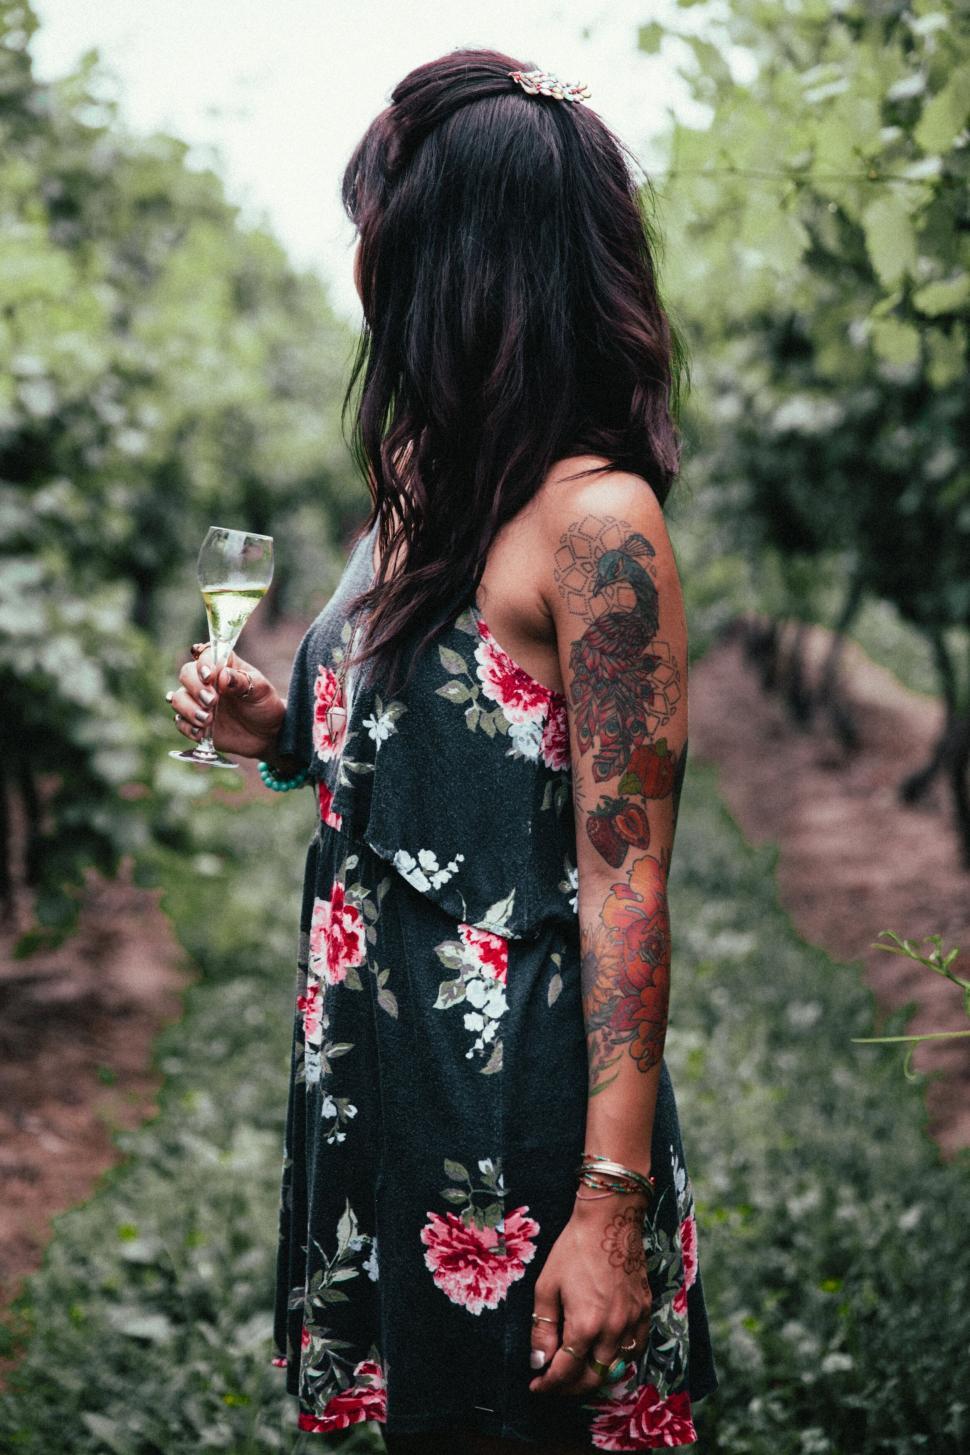 Free Image of Woman with tattoos holding wine in vineyard 